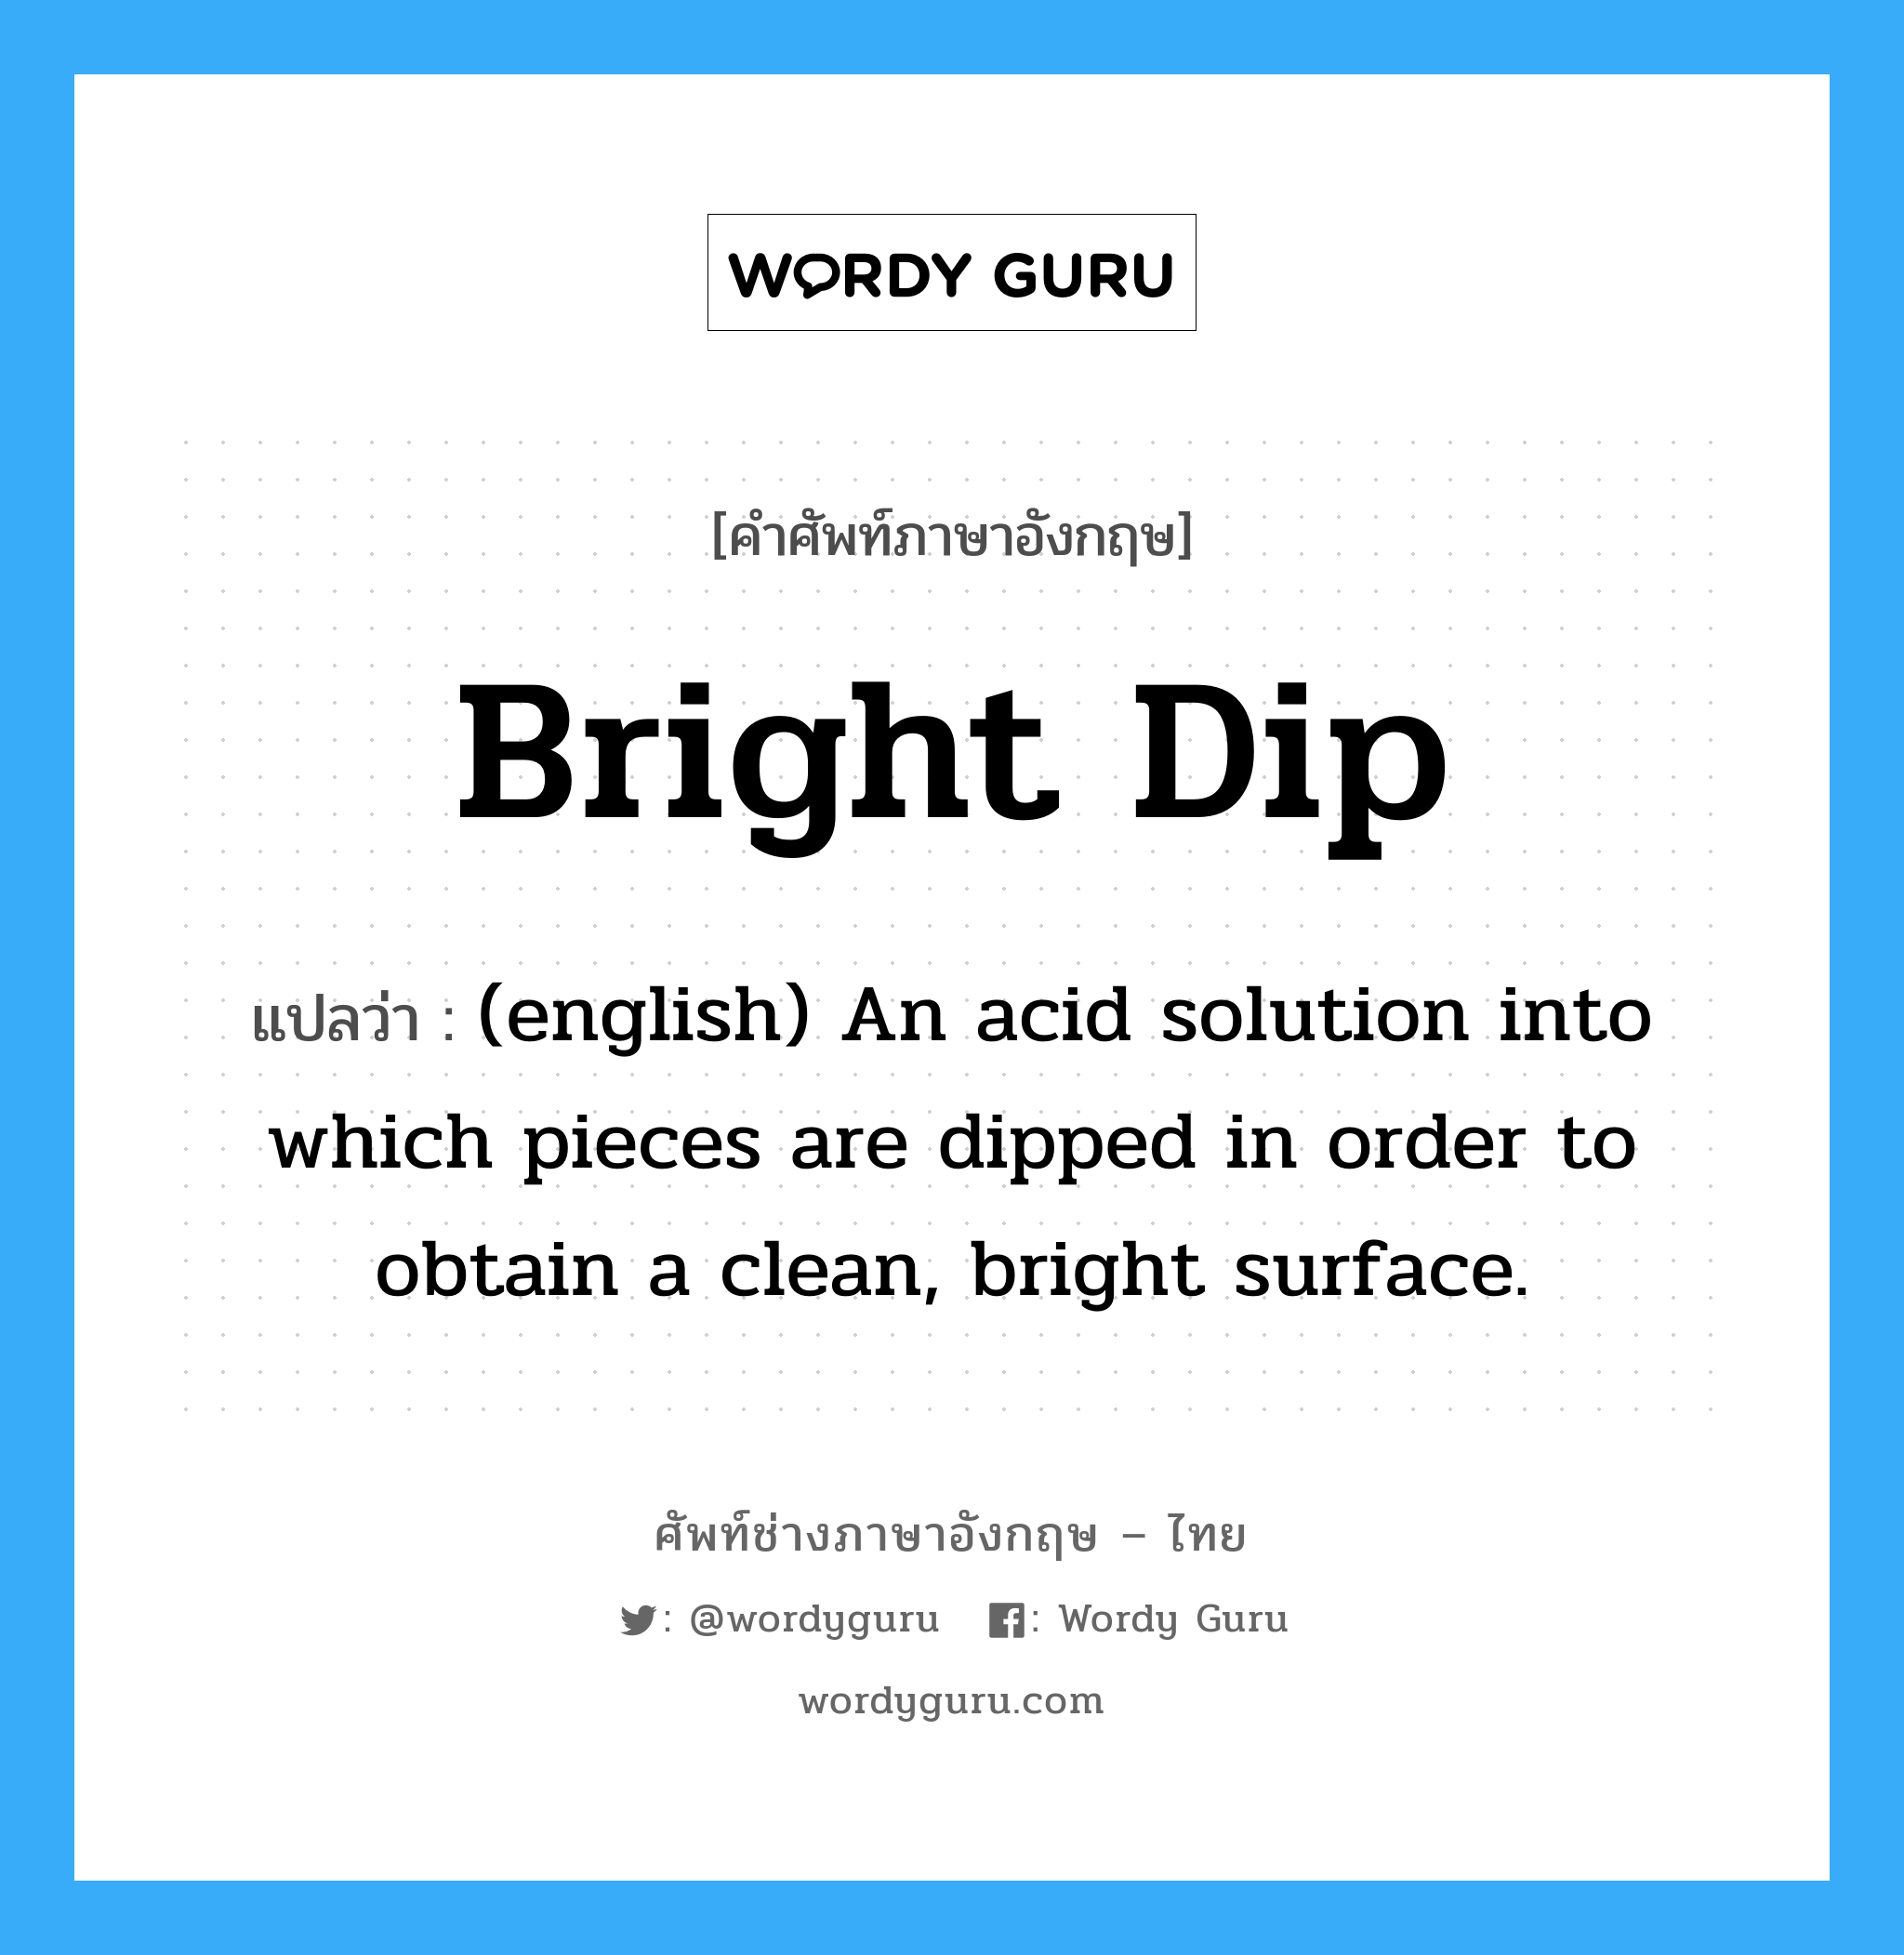 Bright Dip แปลว่า?, คำศัพท์ช่างภาษาอังกฤษ - ไทย Bright Dip คำศัพท์ภาษาอังกฤษ Bright Dip แปลว่า (english) An acid solution into which pieces are dipped in order to obtain a clean, bright surface.